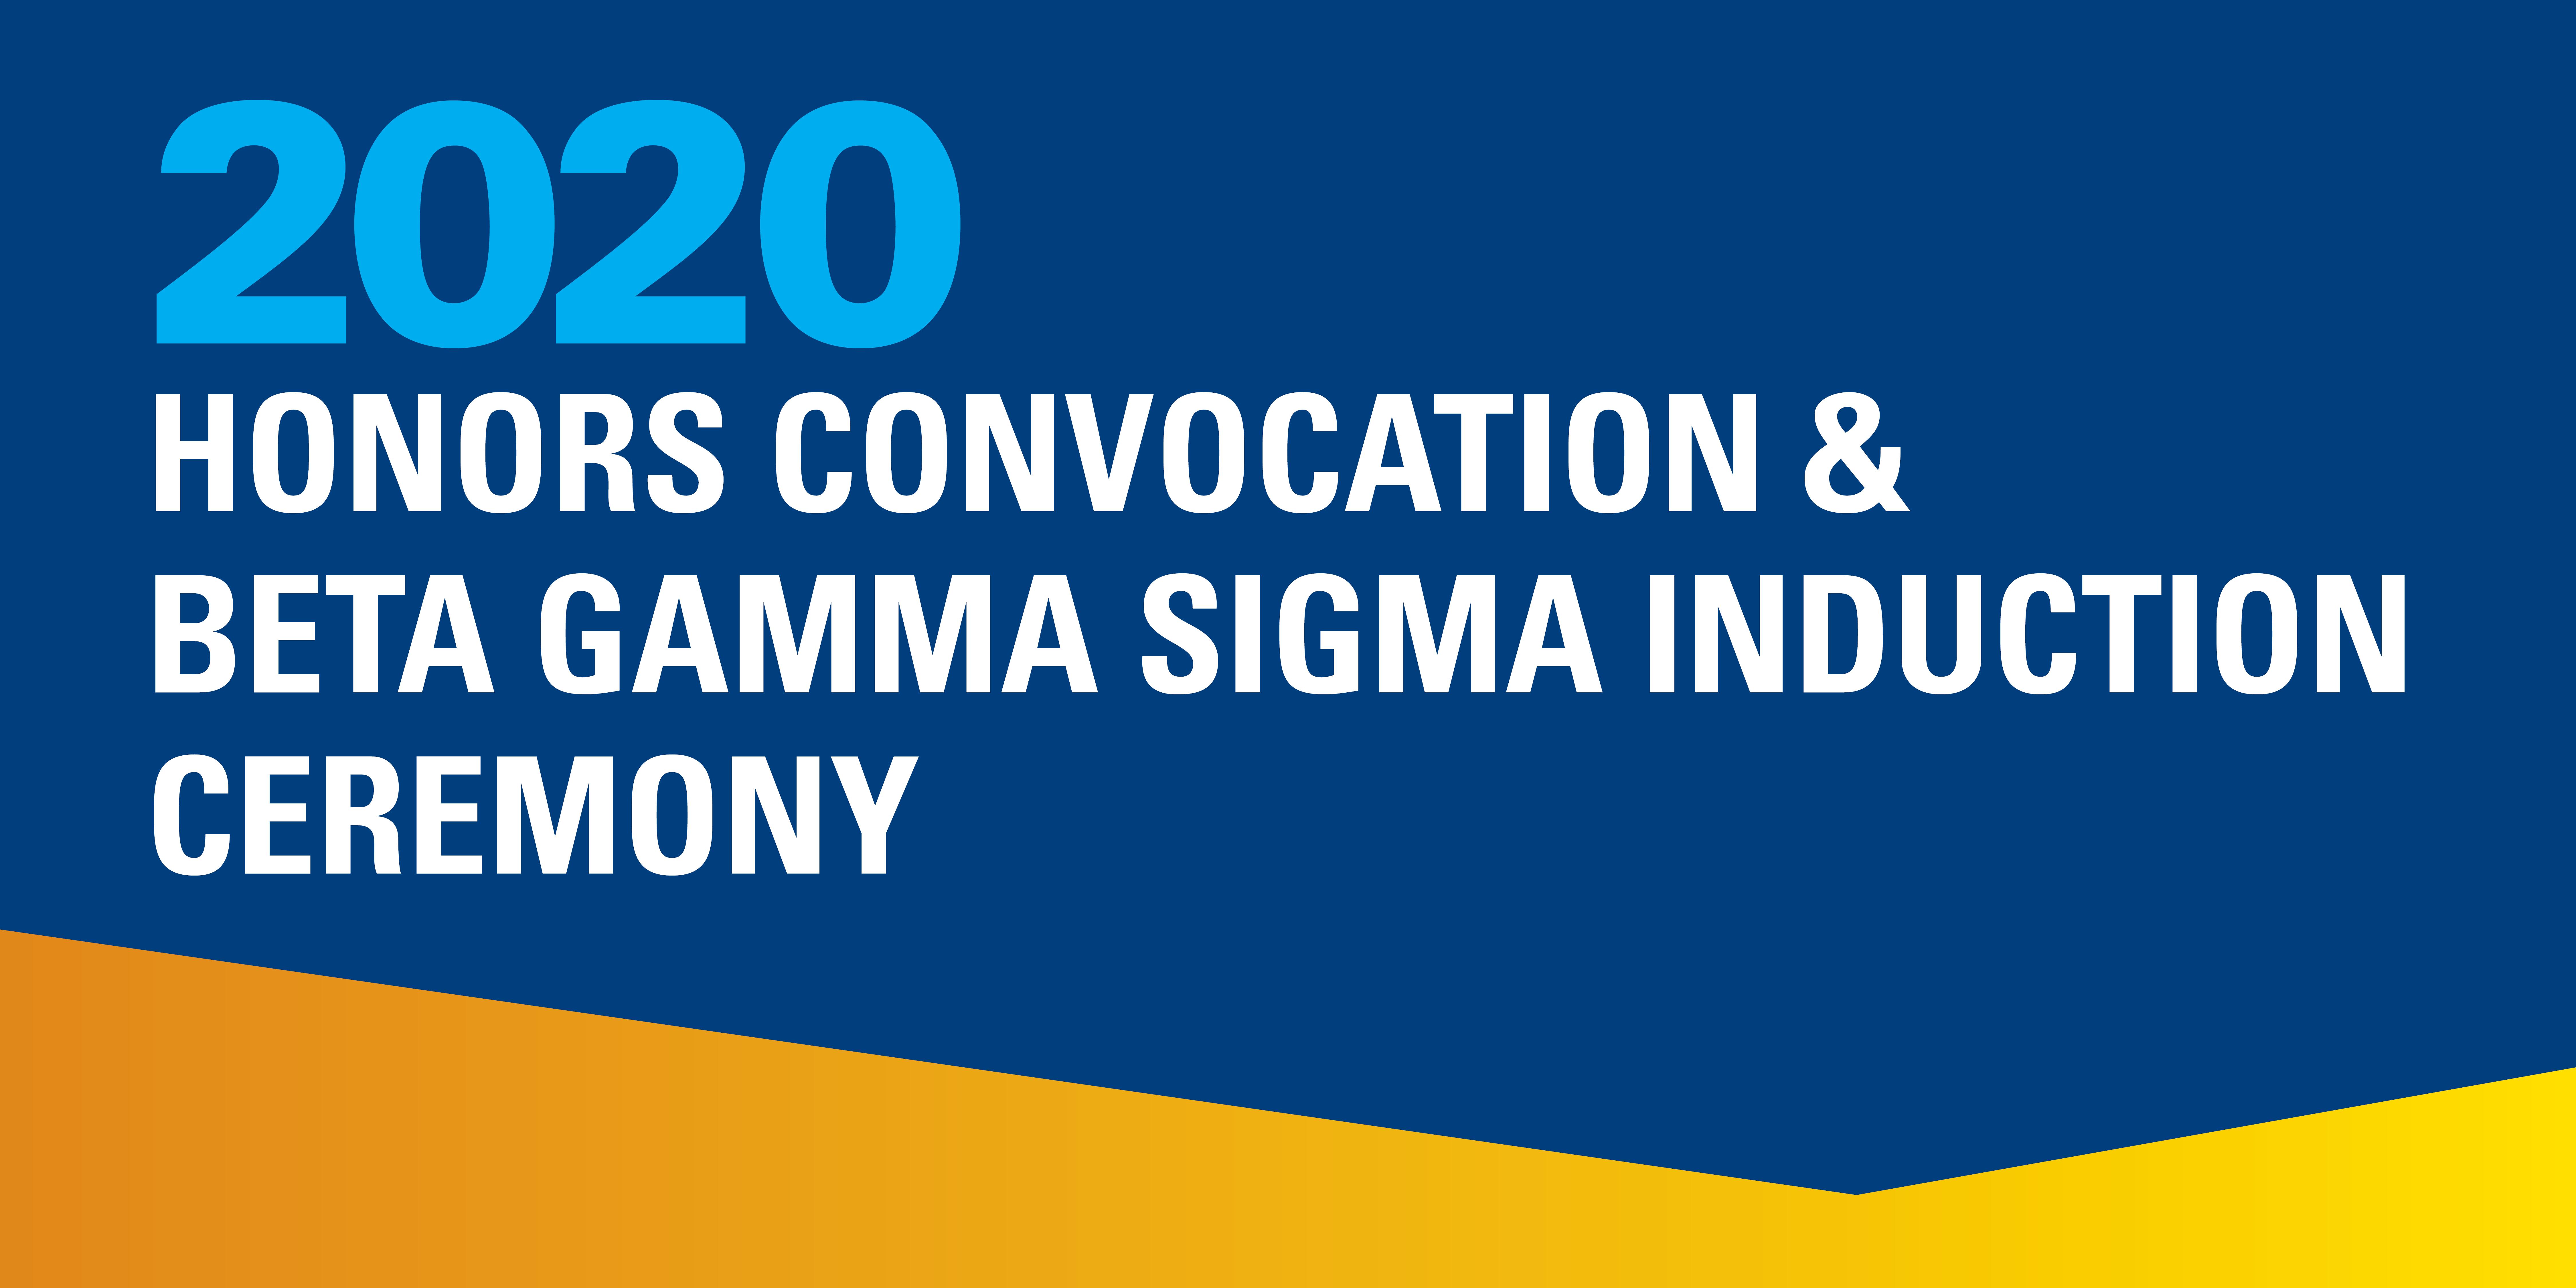 2020 Honors Convocation & Beta Gamma Sigma Induction Ceremony